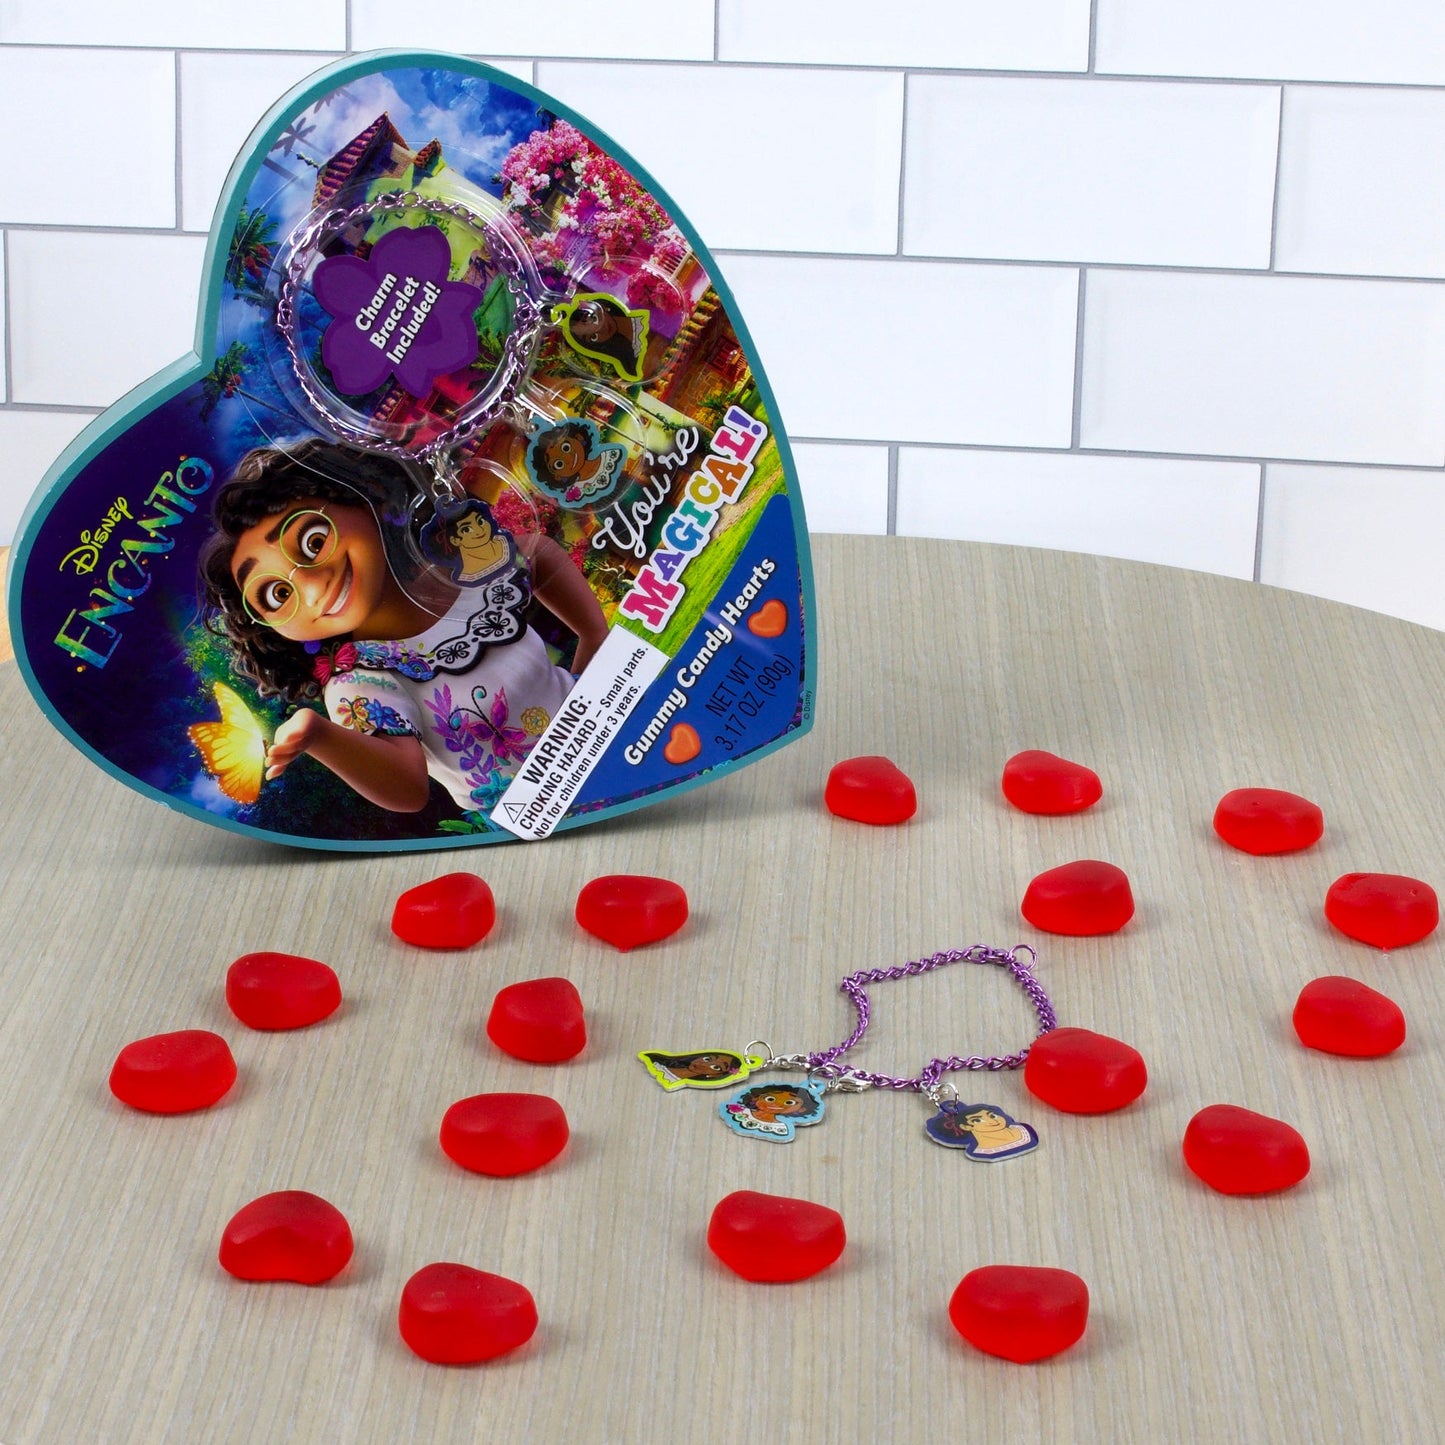 Blue Heart shaped box on its side surrounded by red heart shaped gummy candies and purple character charm bracelet